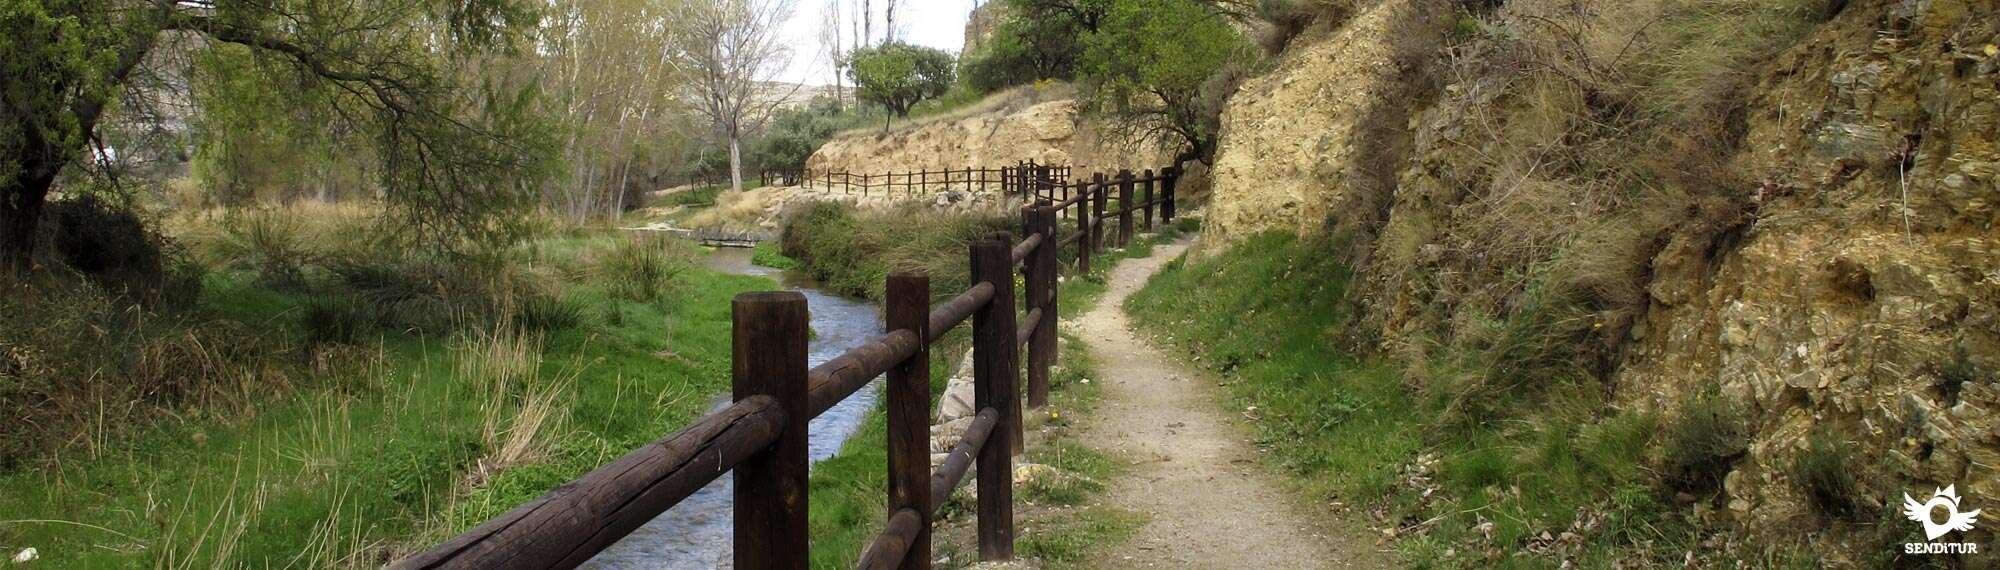 Path Green of the Alhama